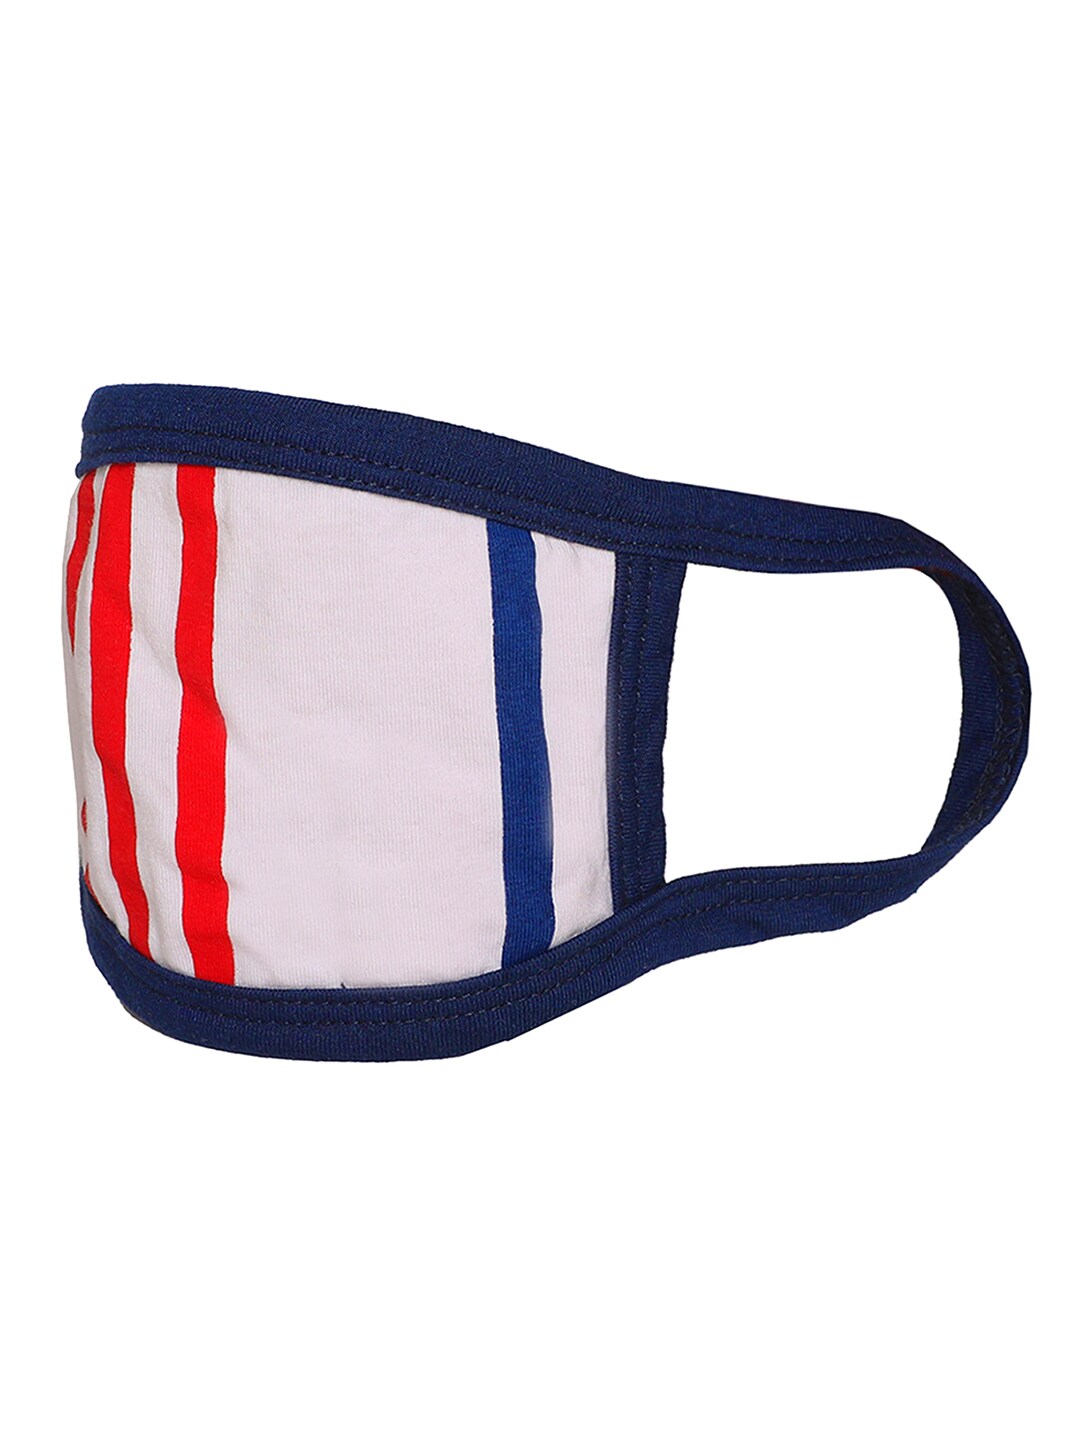 Skidlers Women White & Blue Striped 2-Layers Cloth Mask Price in India